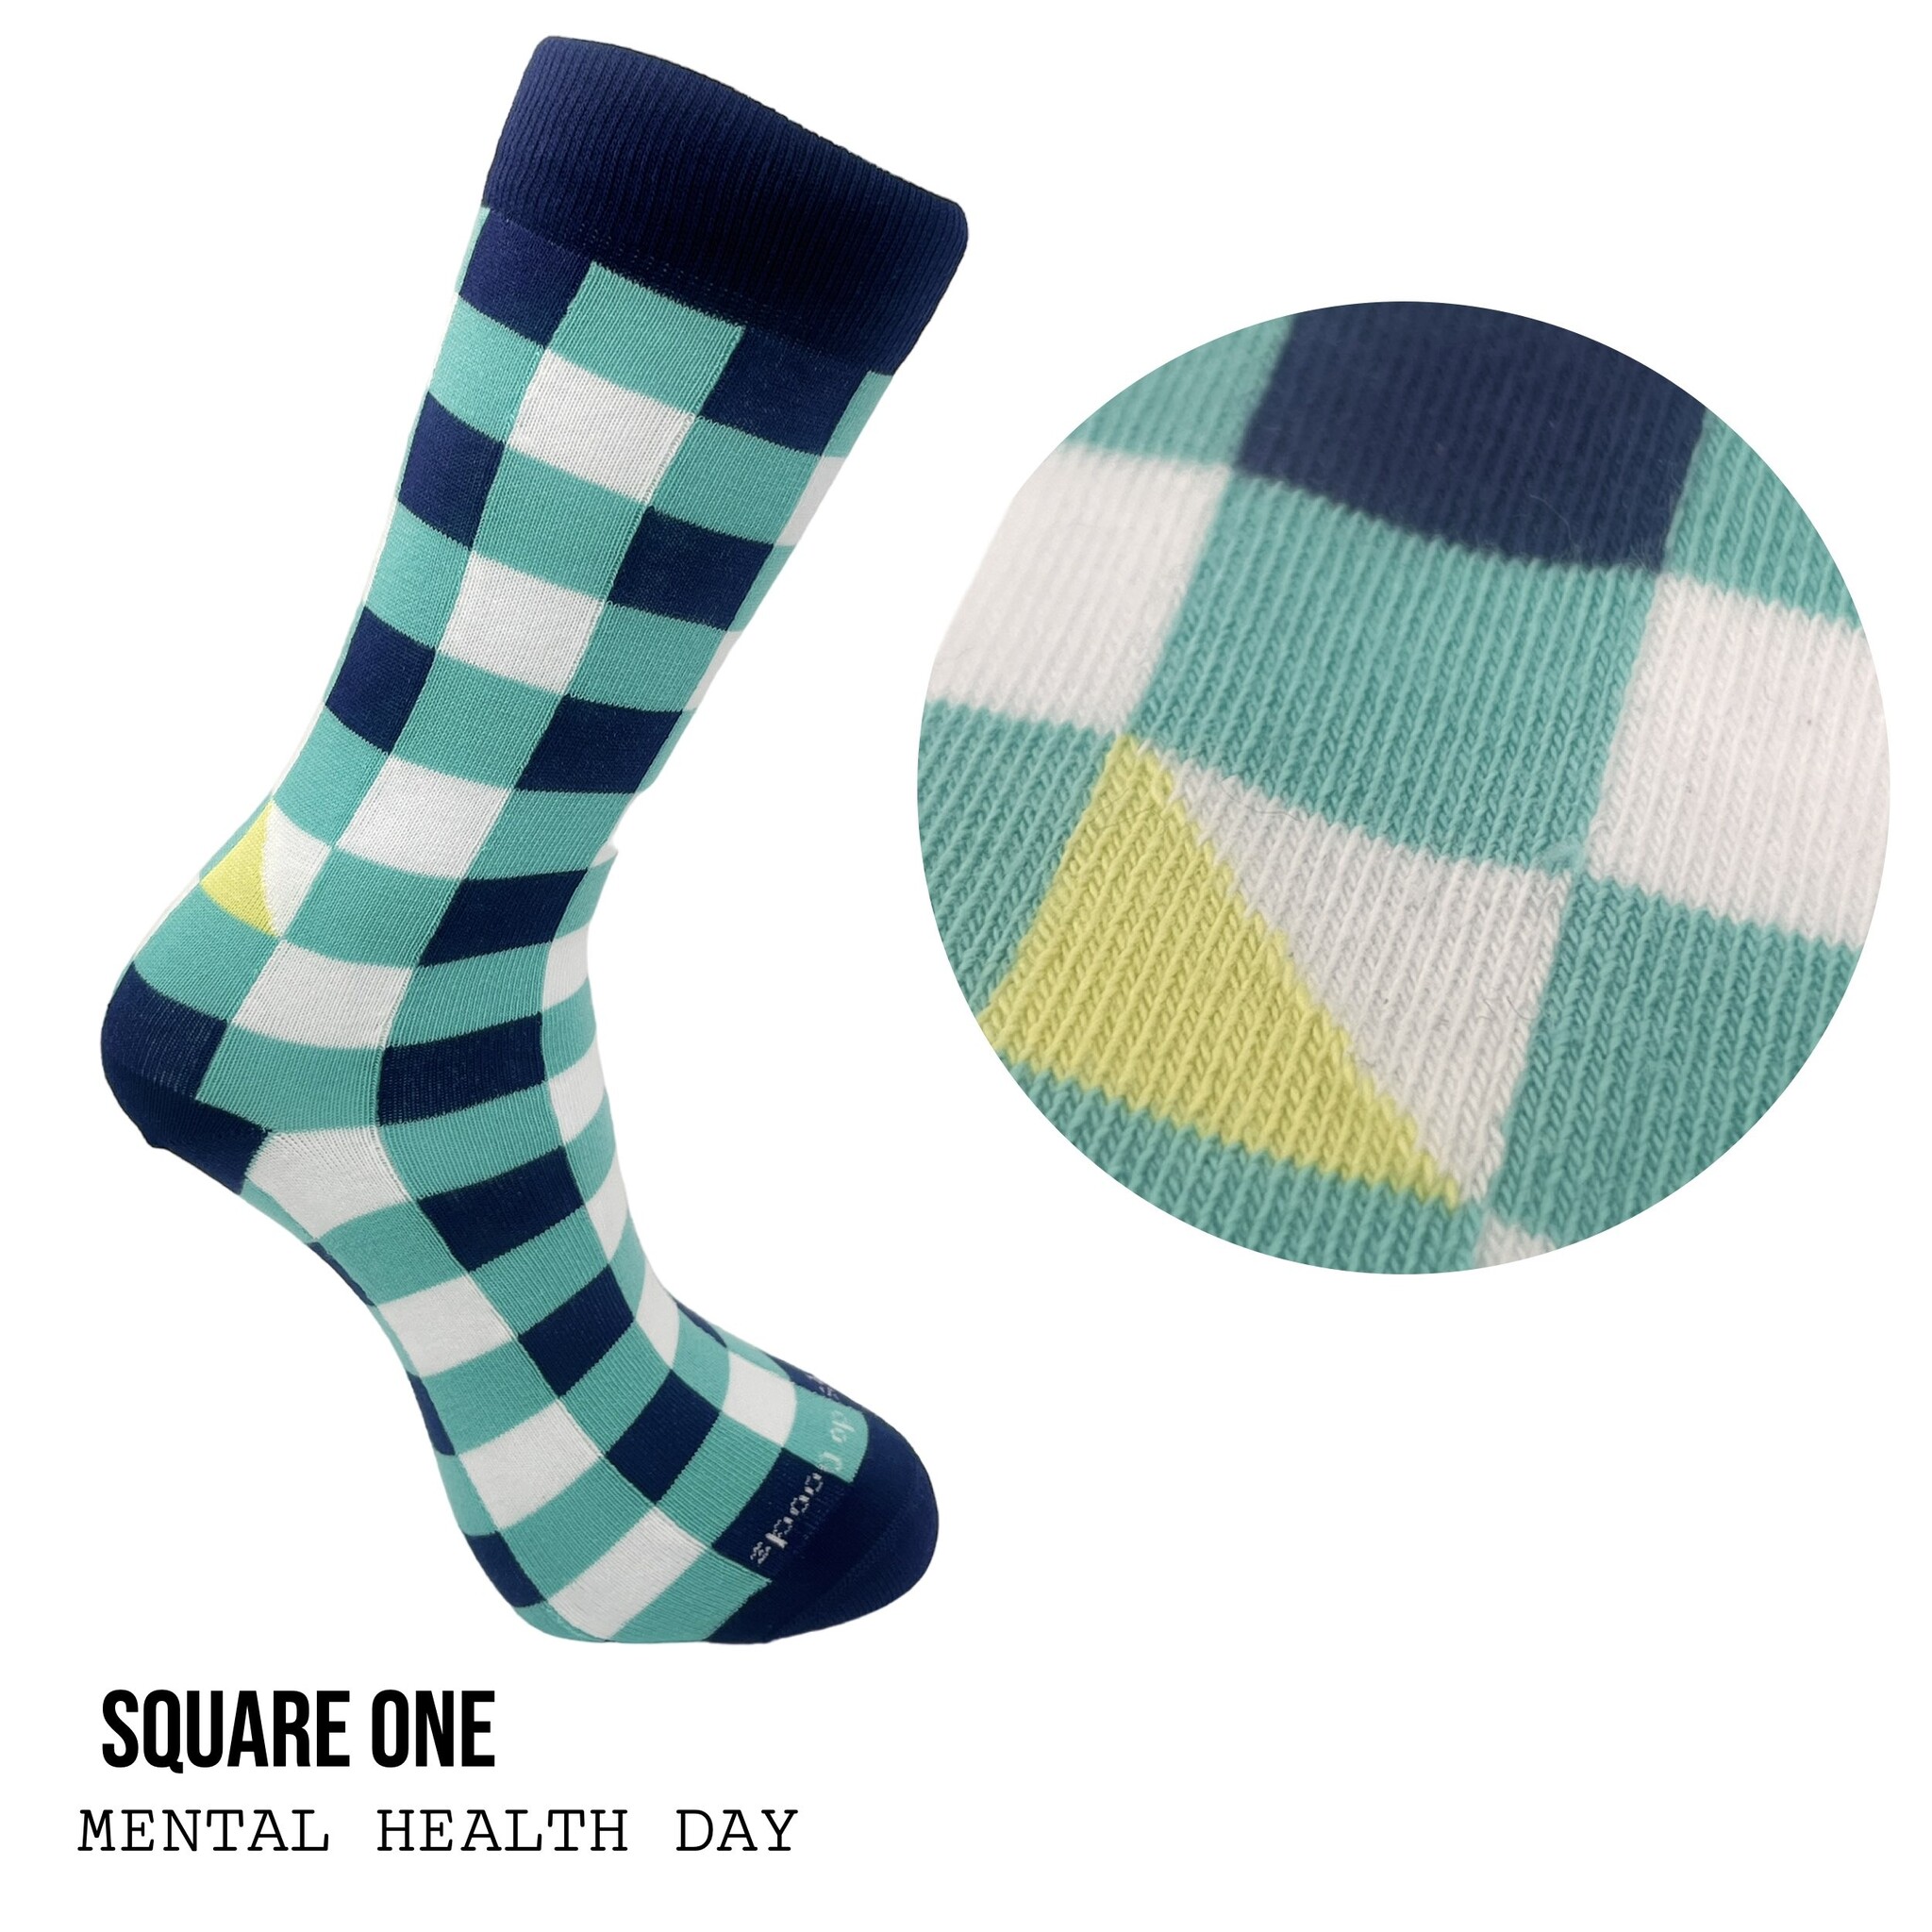 Square one by Lets Do Goods